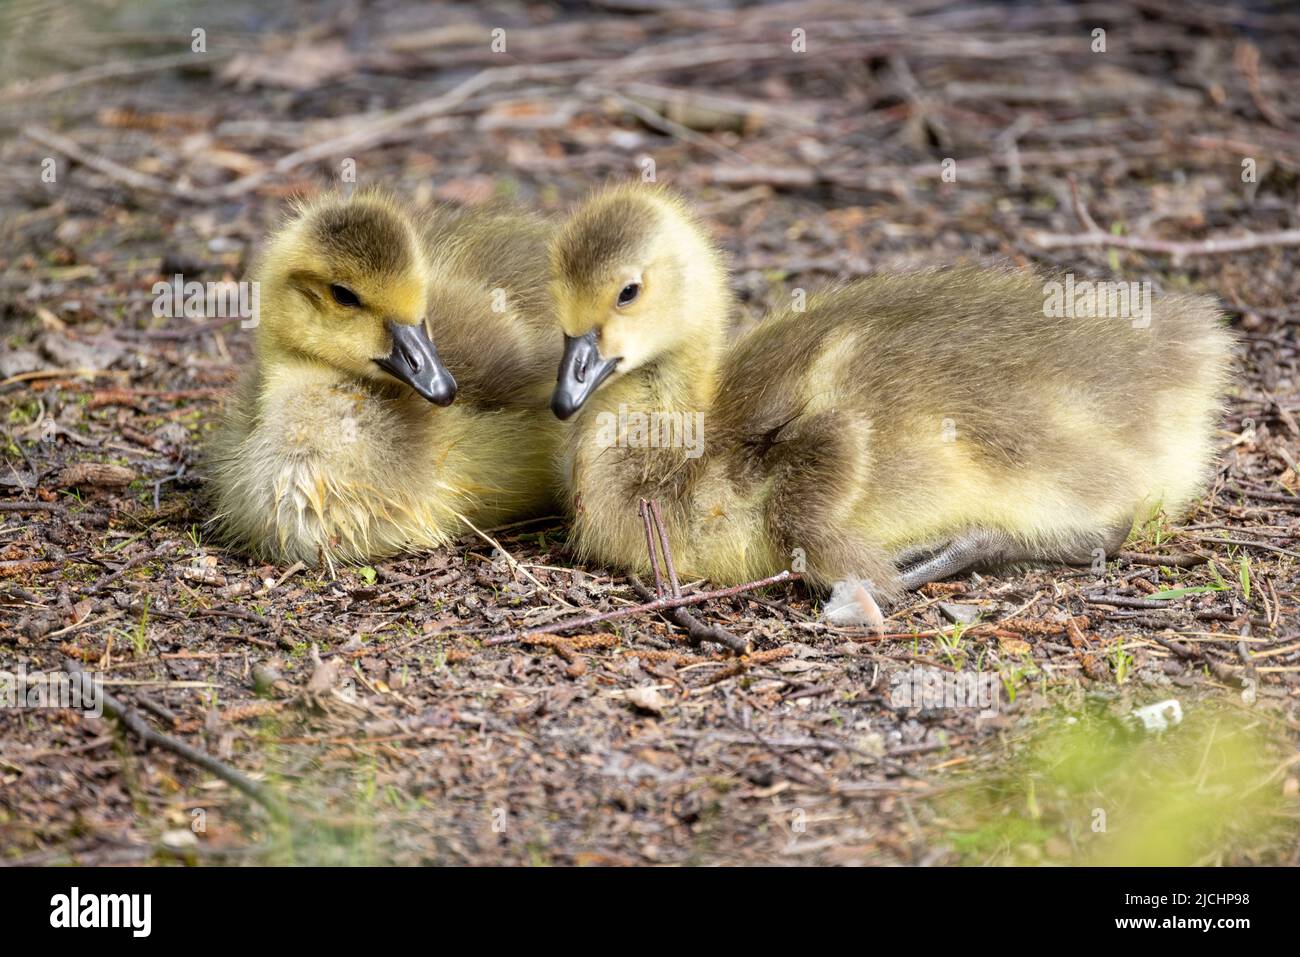 Two Baby Canada Geese, Branta canadensis, or goslings Resting on the ground. High quality photo Stock Photo